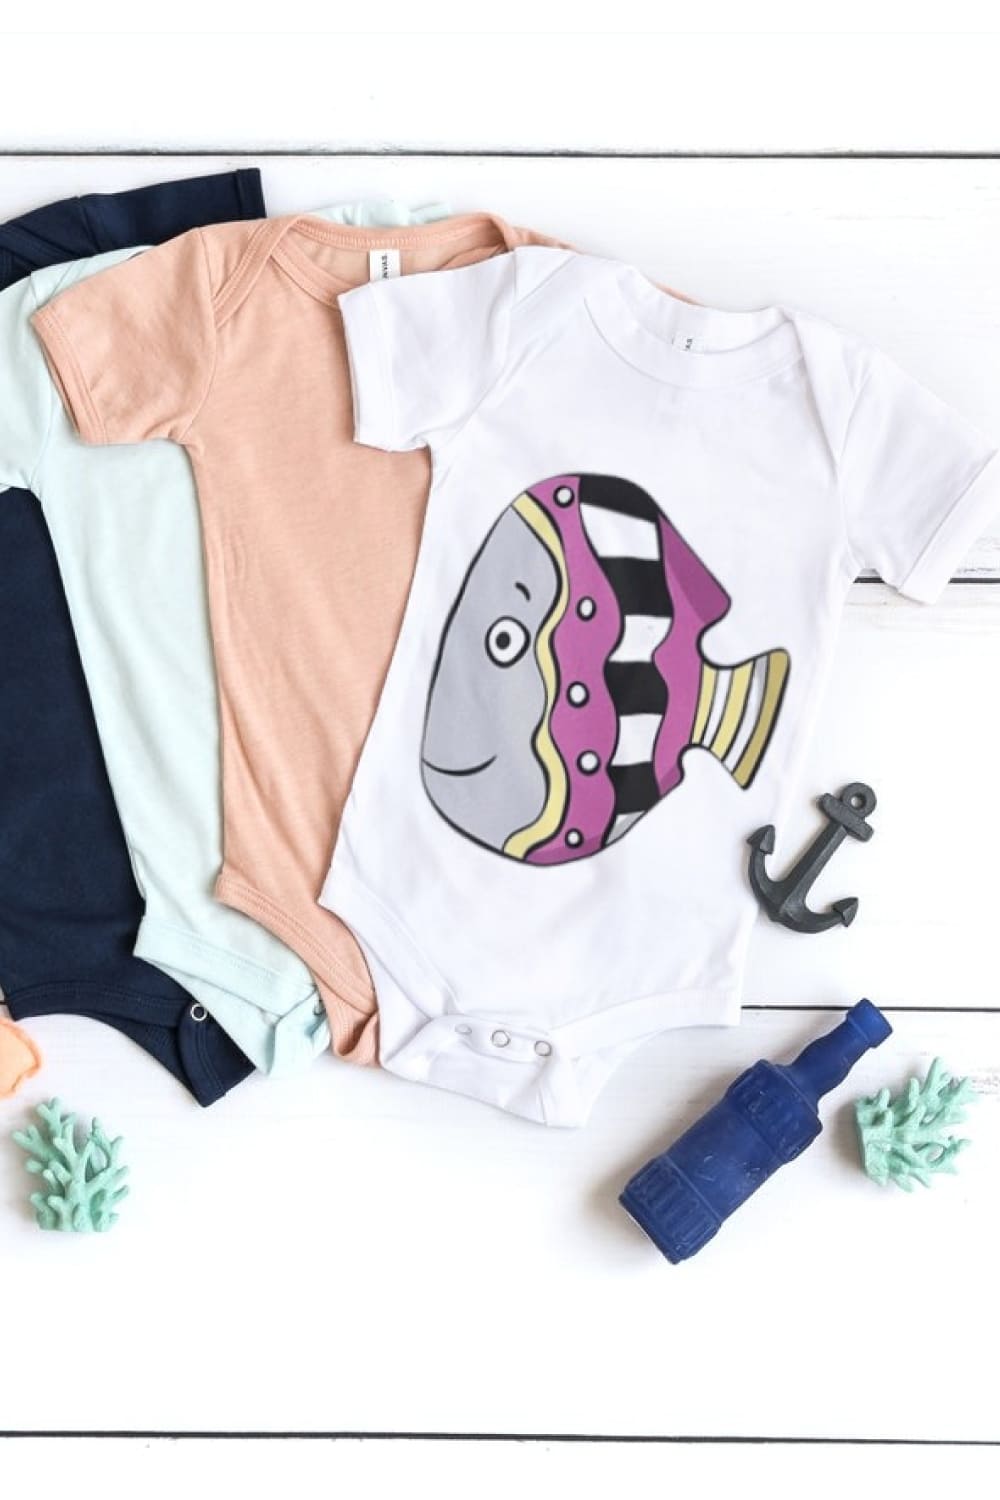 These funky fish illustrations are ideal for prints, kids giftware and patterns.